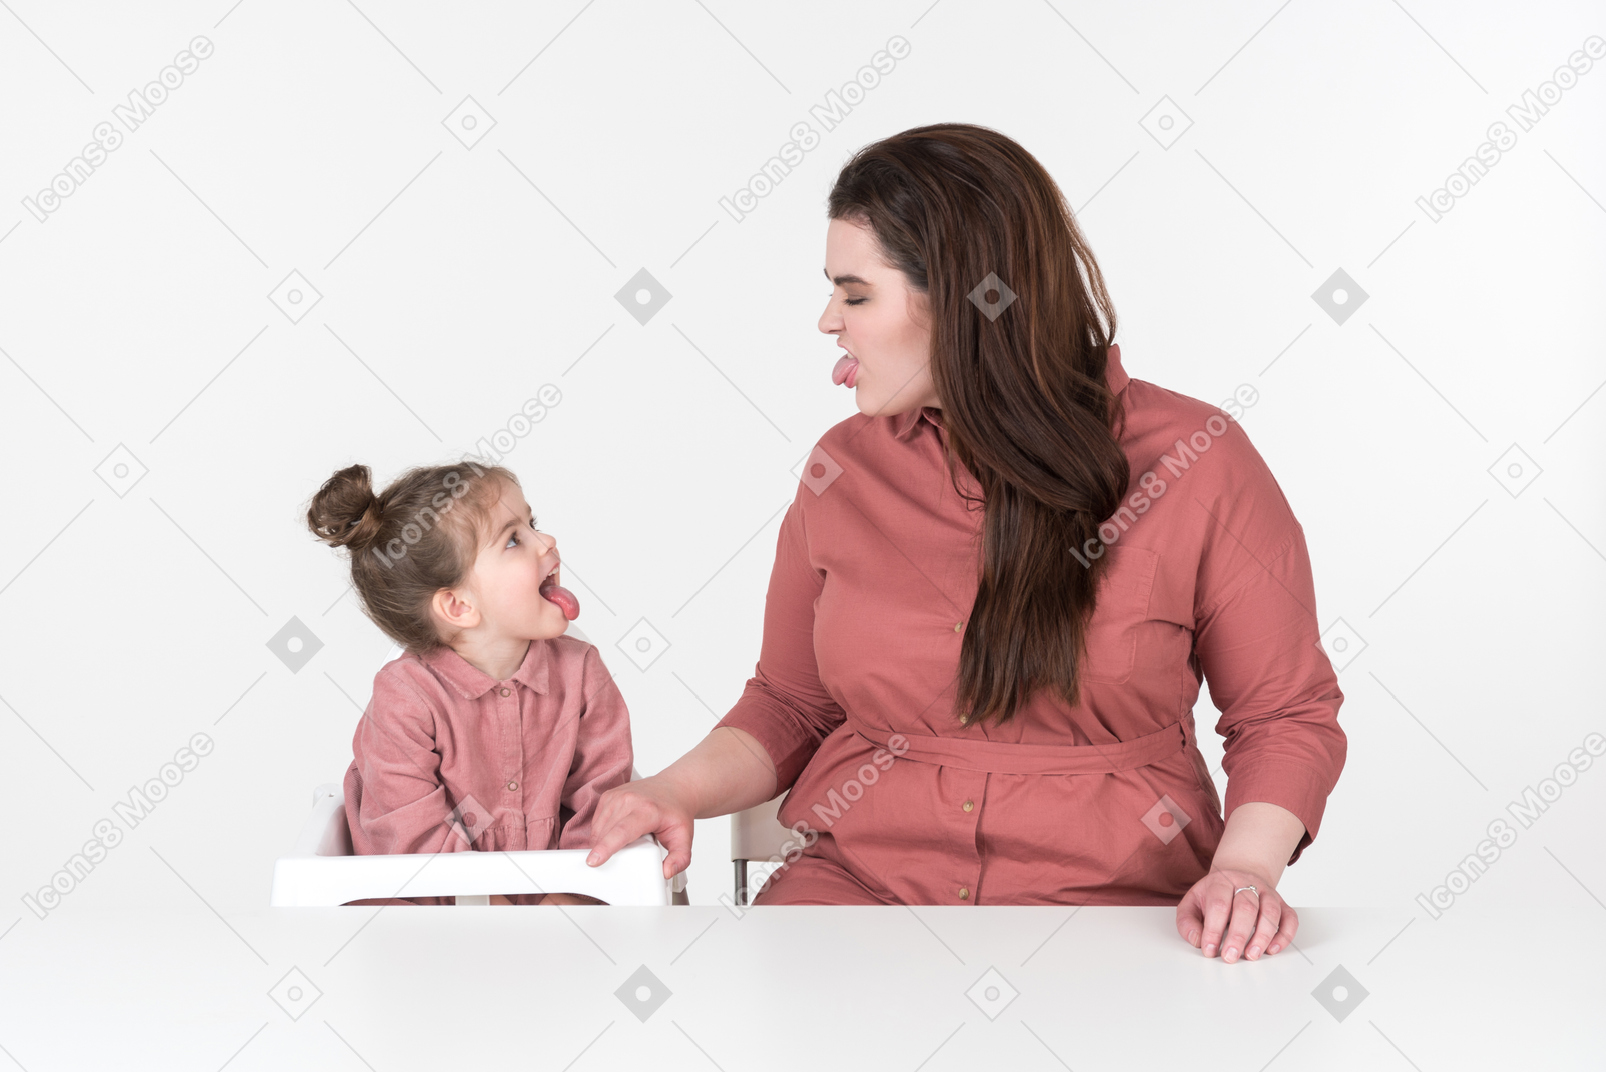 Mother and her little daughter, wearing red and pink clothes, having fun at the dinner table